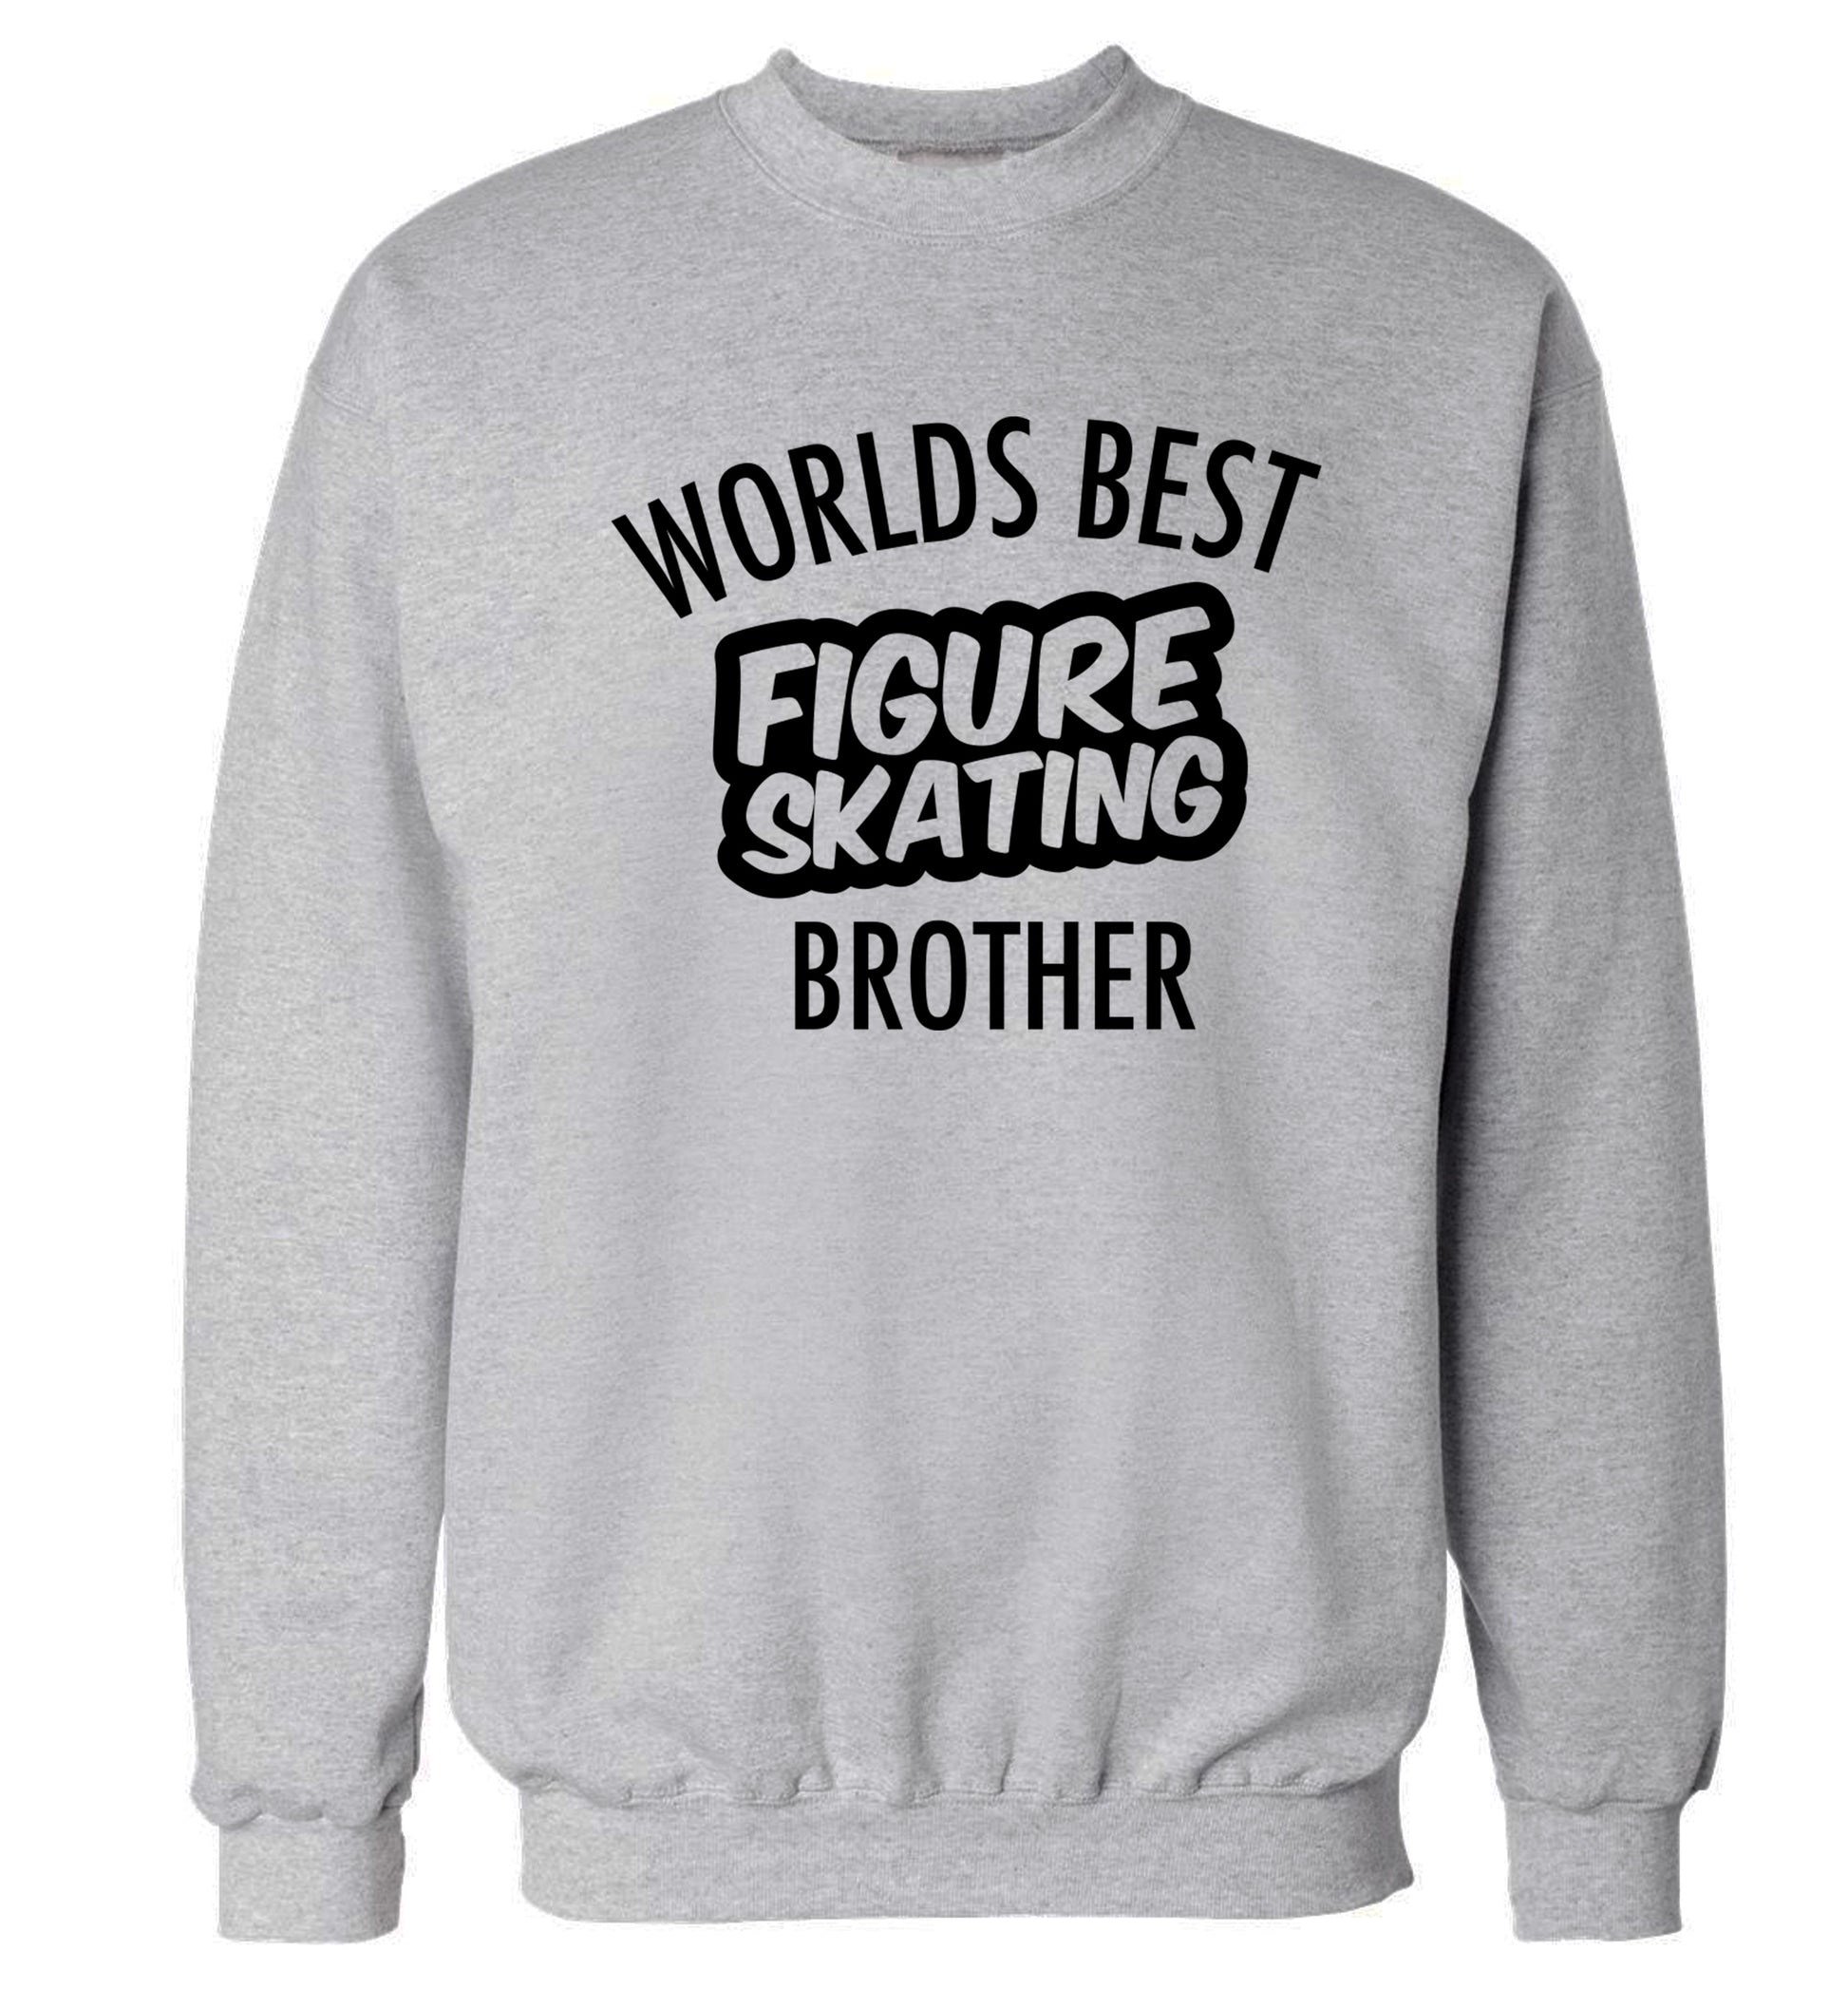 Worlds best figure skating brother Adult's unisexgrey Sweater 2XL